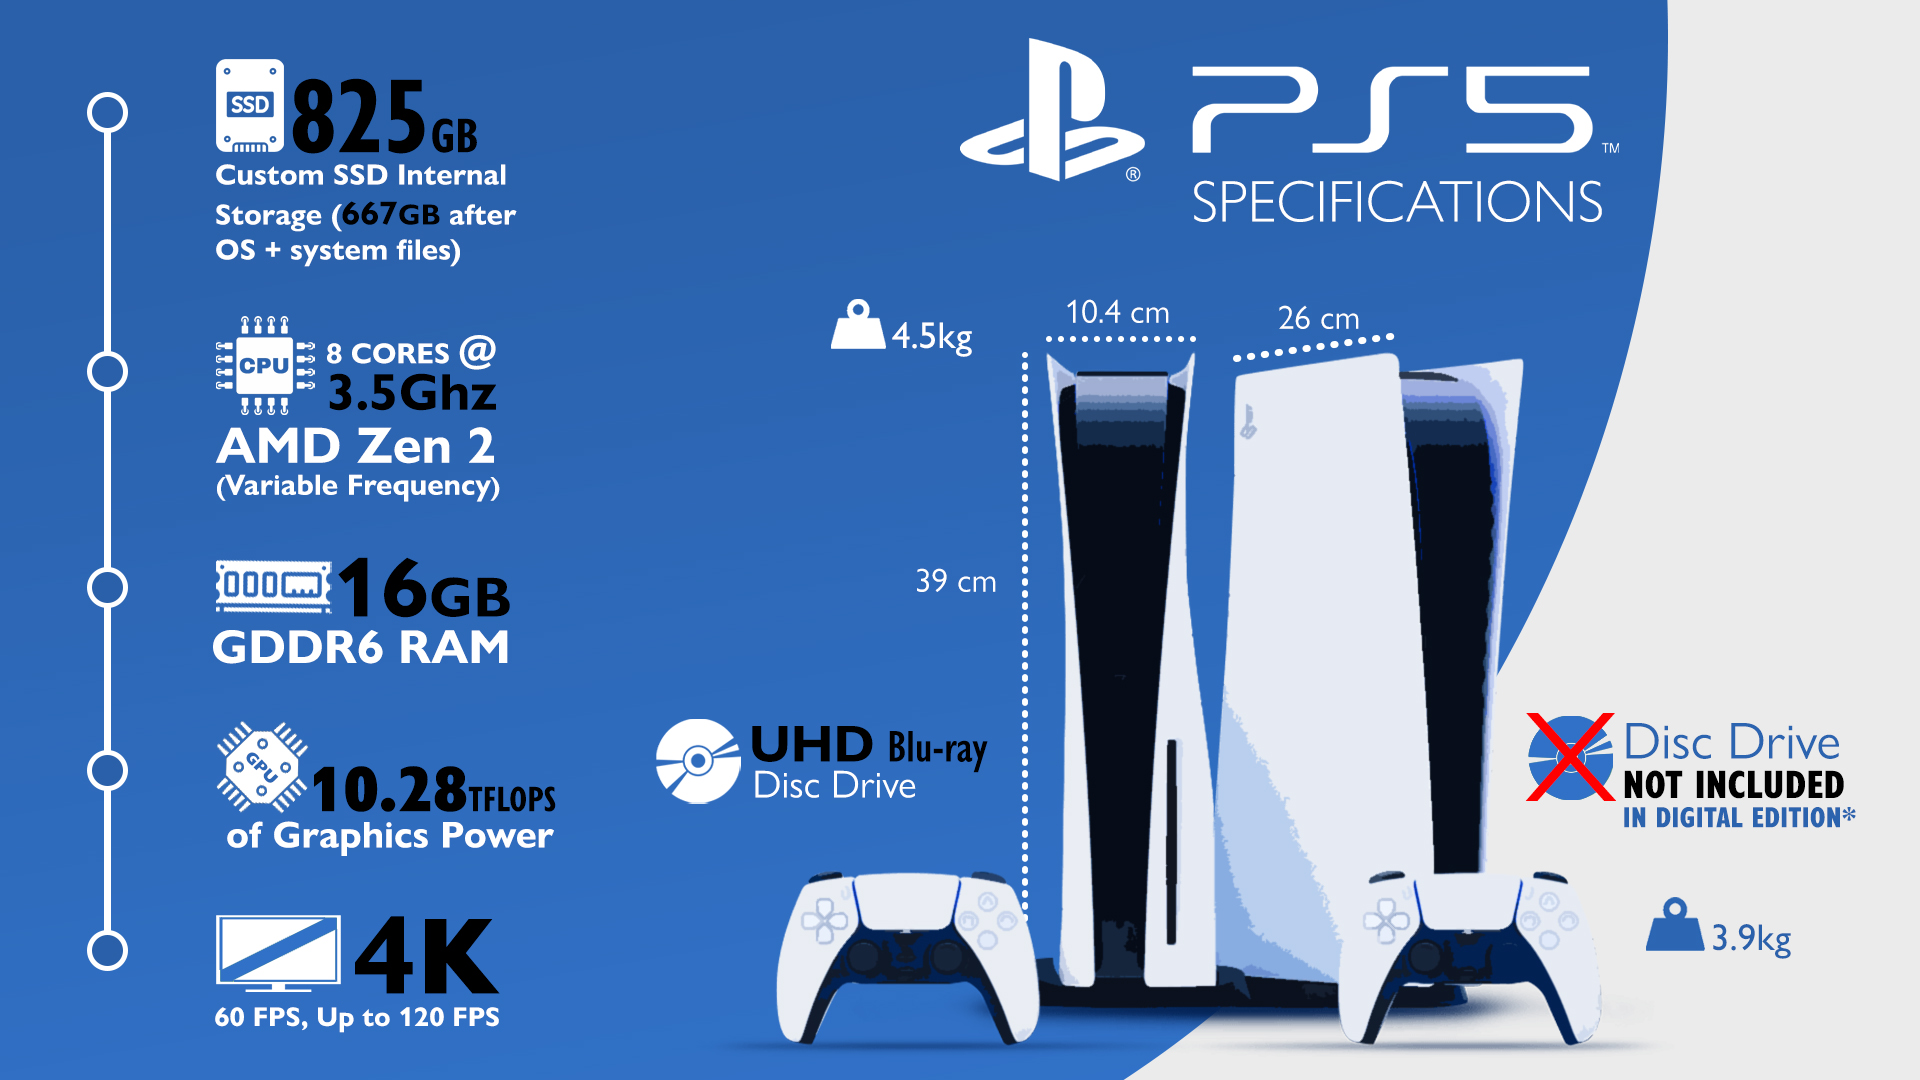 Xbox Series S Black vs PS5 Digital comparison: Which gaming console to buy?